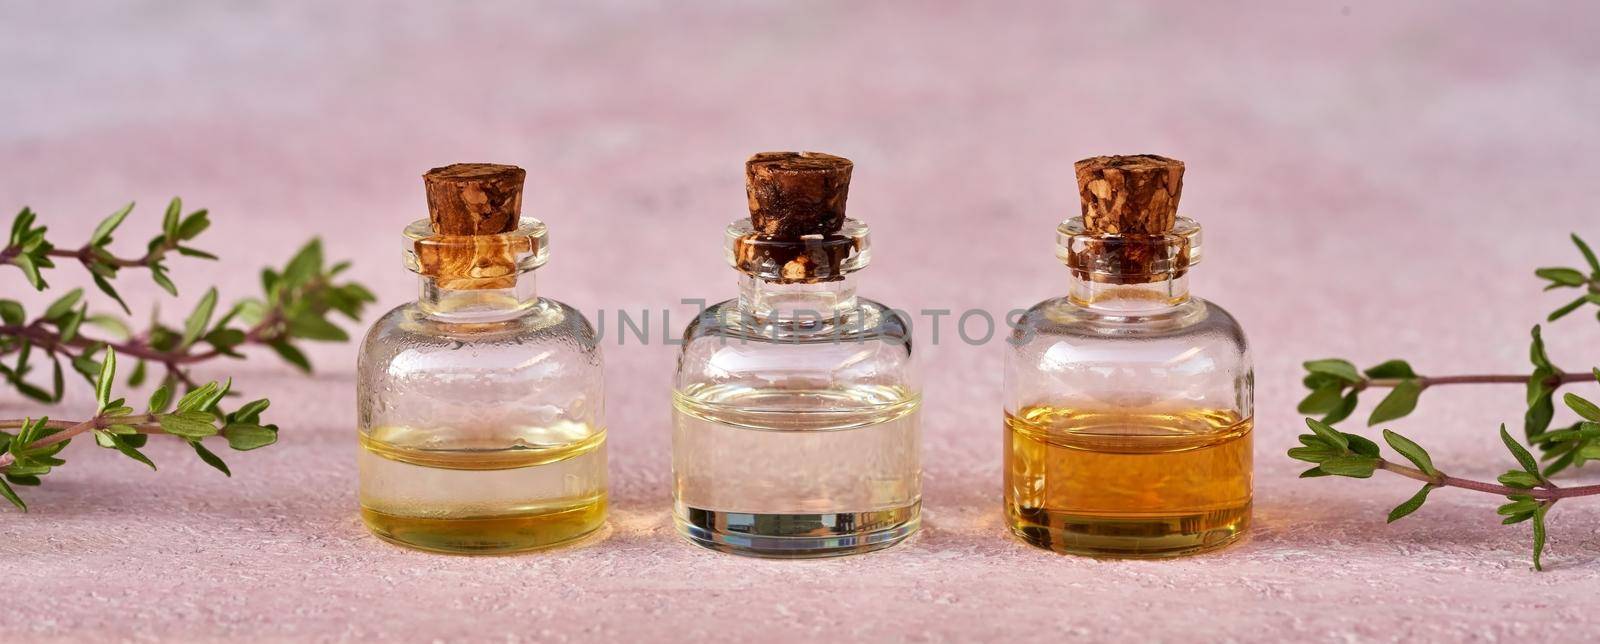 Essential oil bottles with fresh thyme twigs on pastel pink background - aromatherapy concept